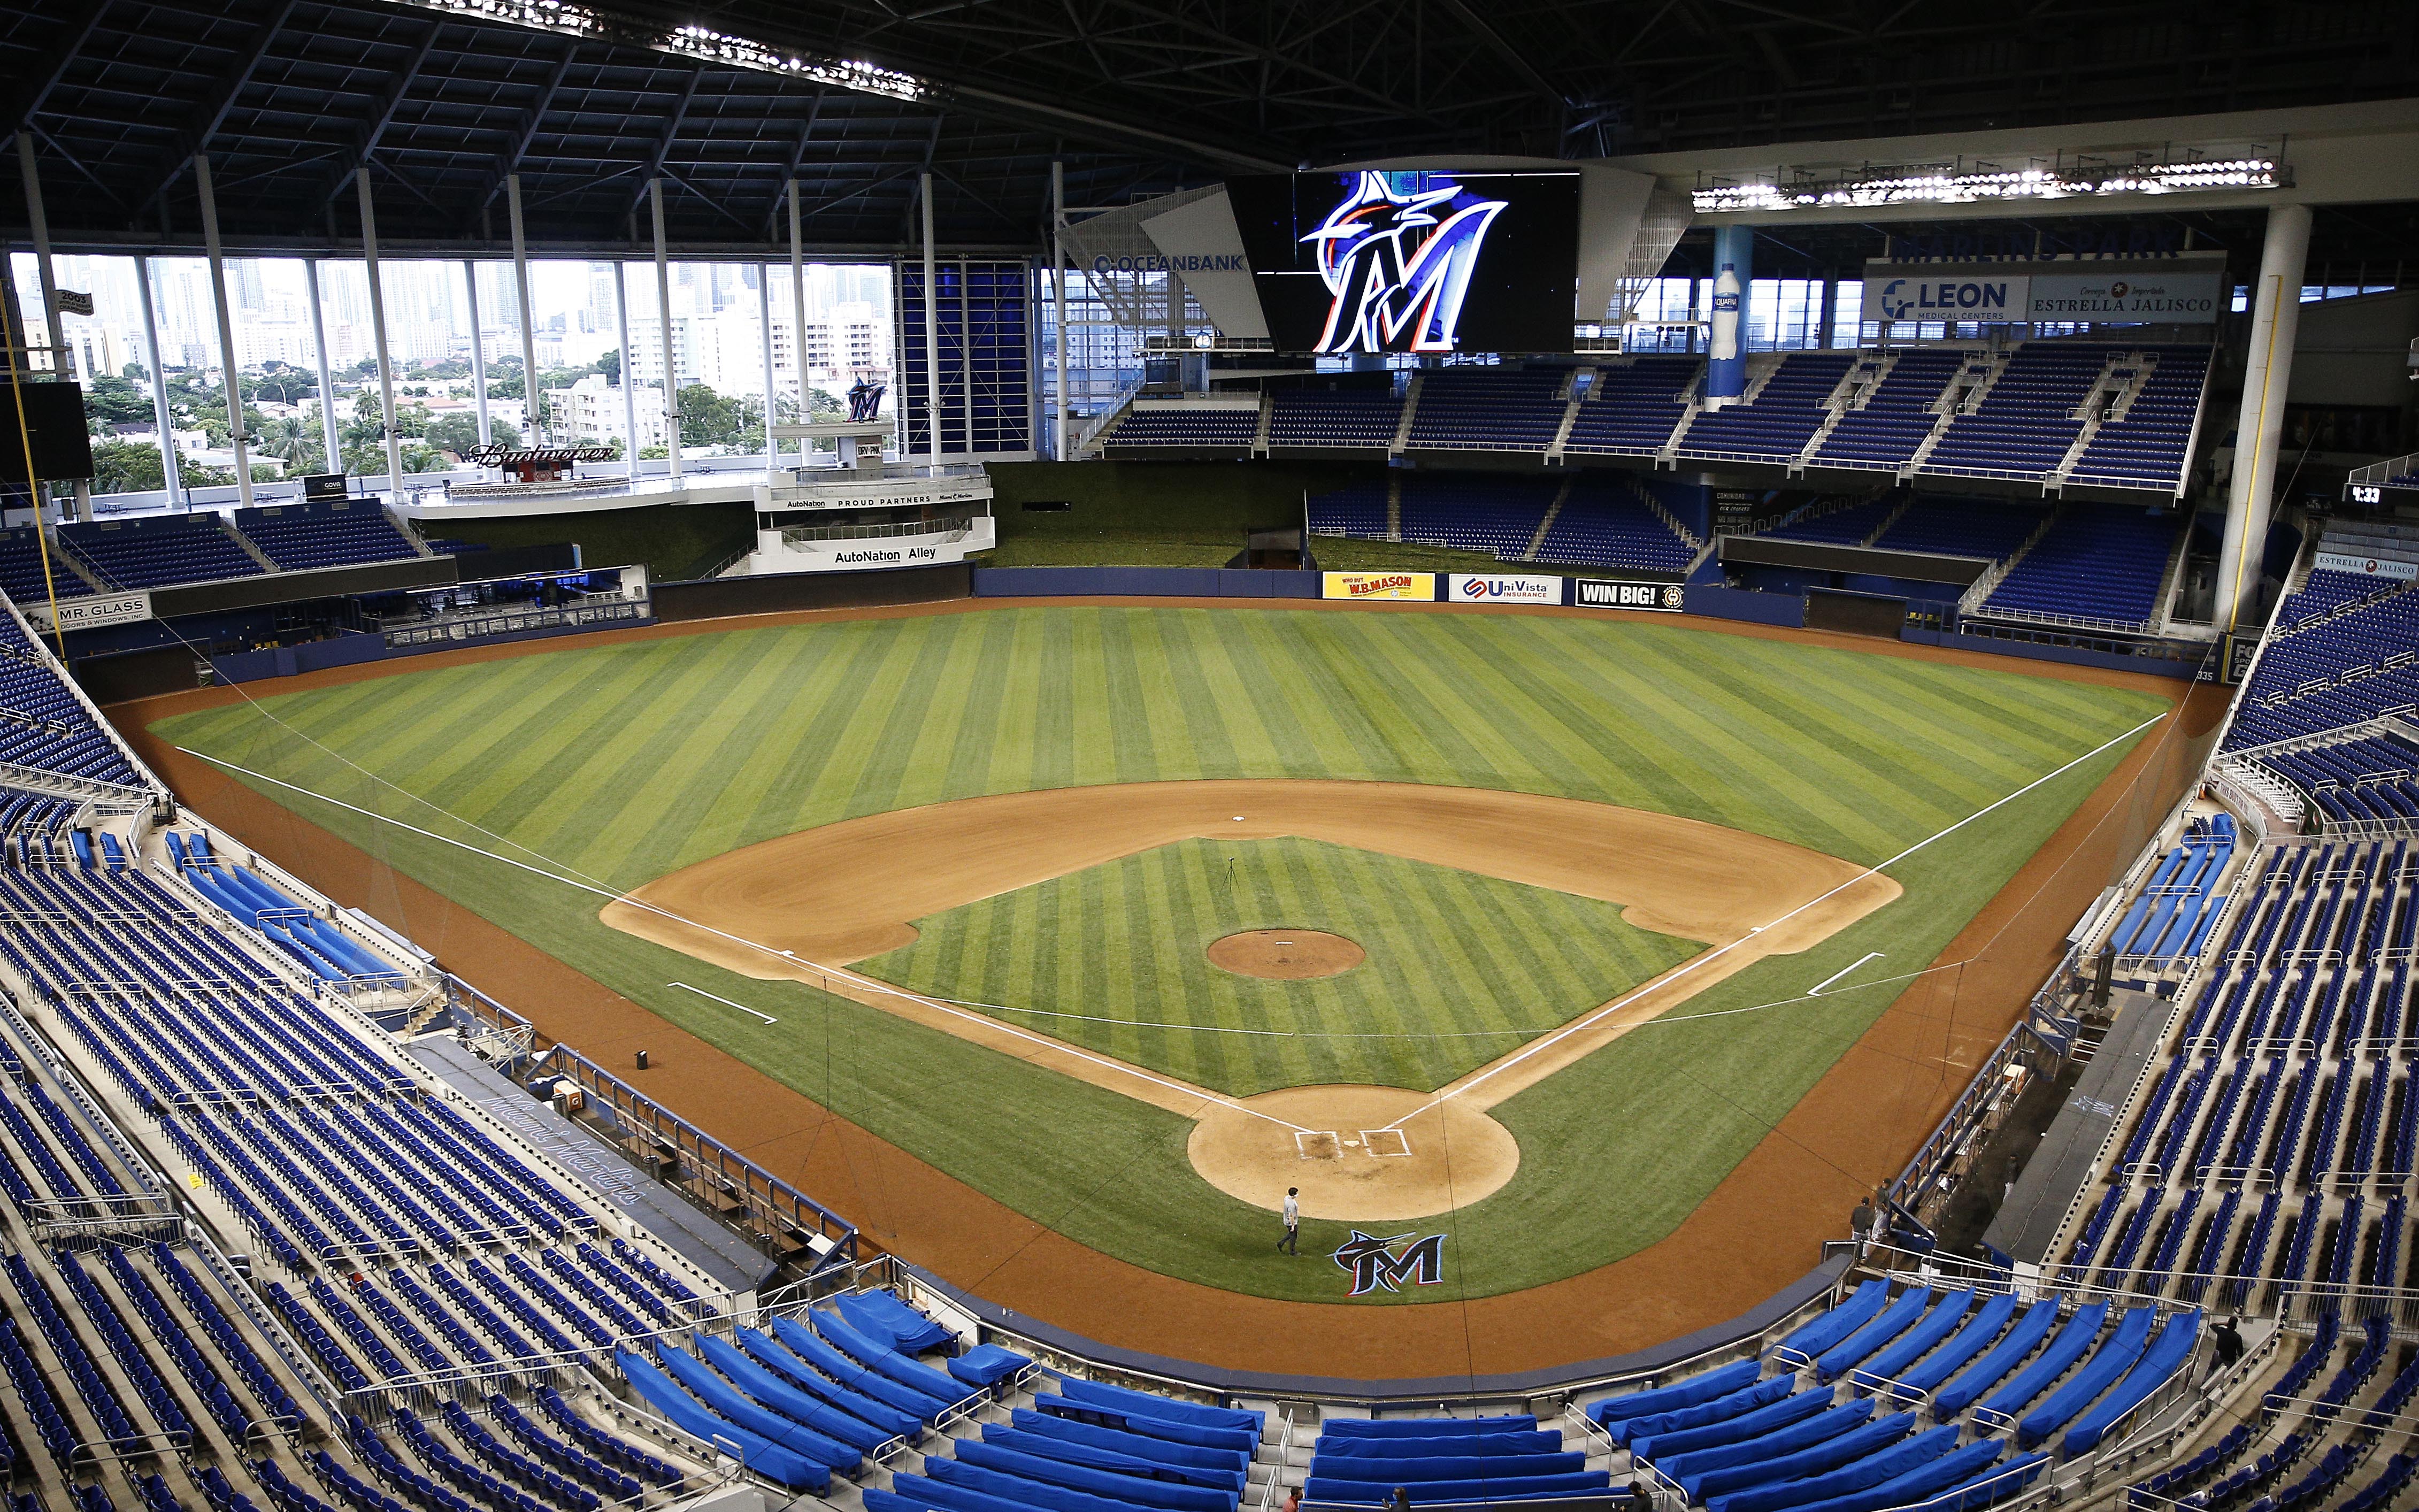 Leave it to the Miami Marlins to mint the worst ballpark name in